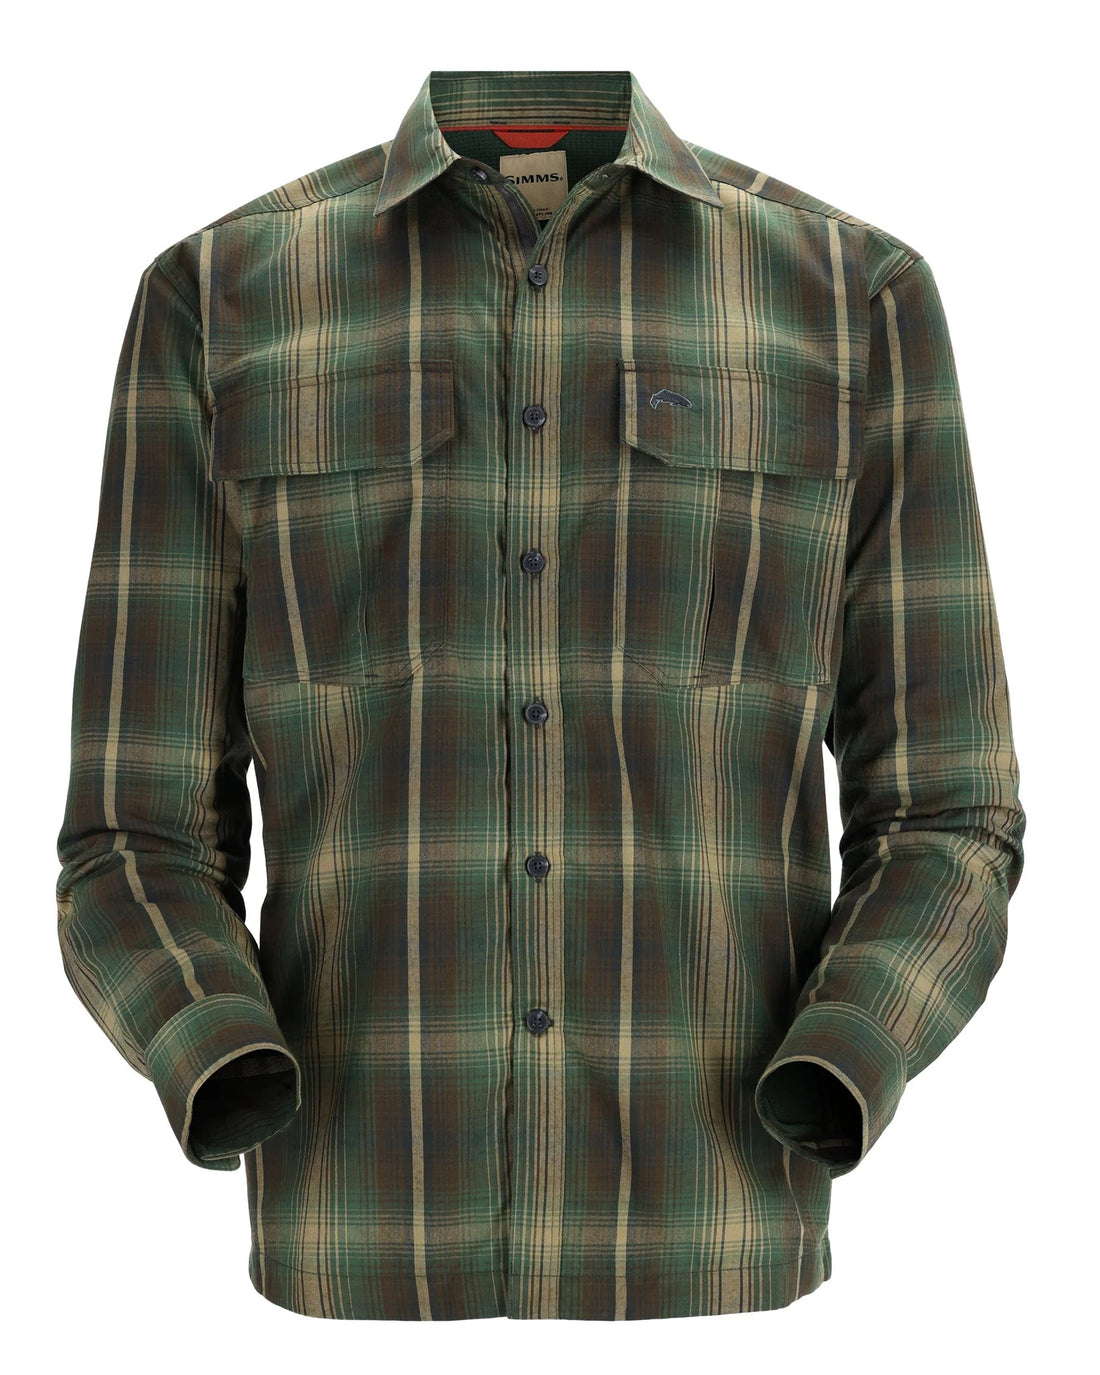 Simms Men's Coldweather LS Shirt - Forest Hickory Plaid